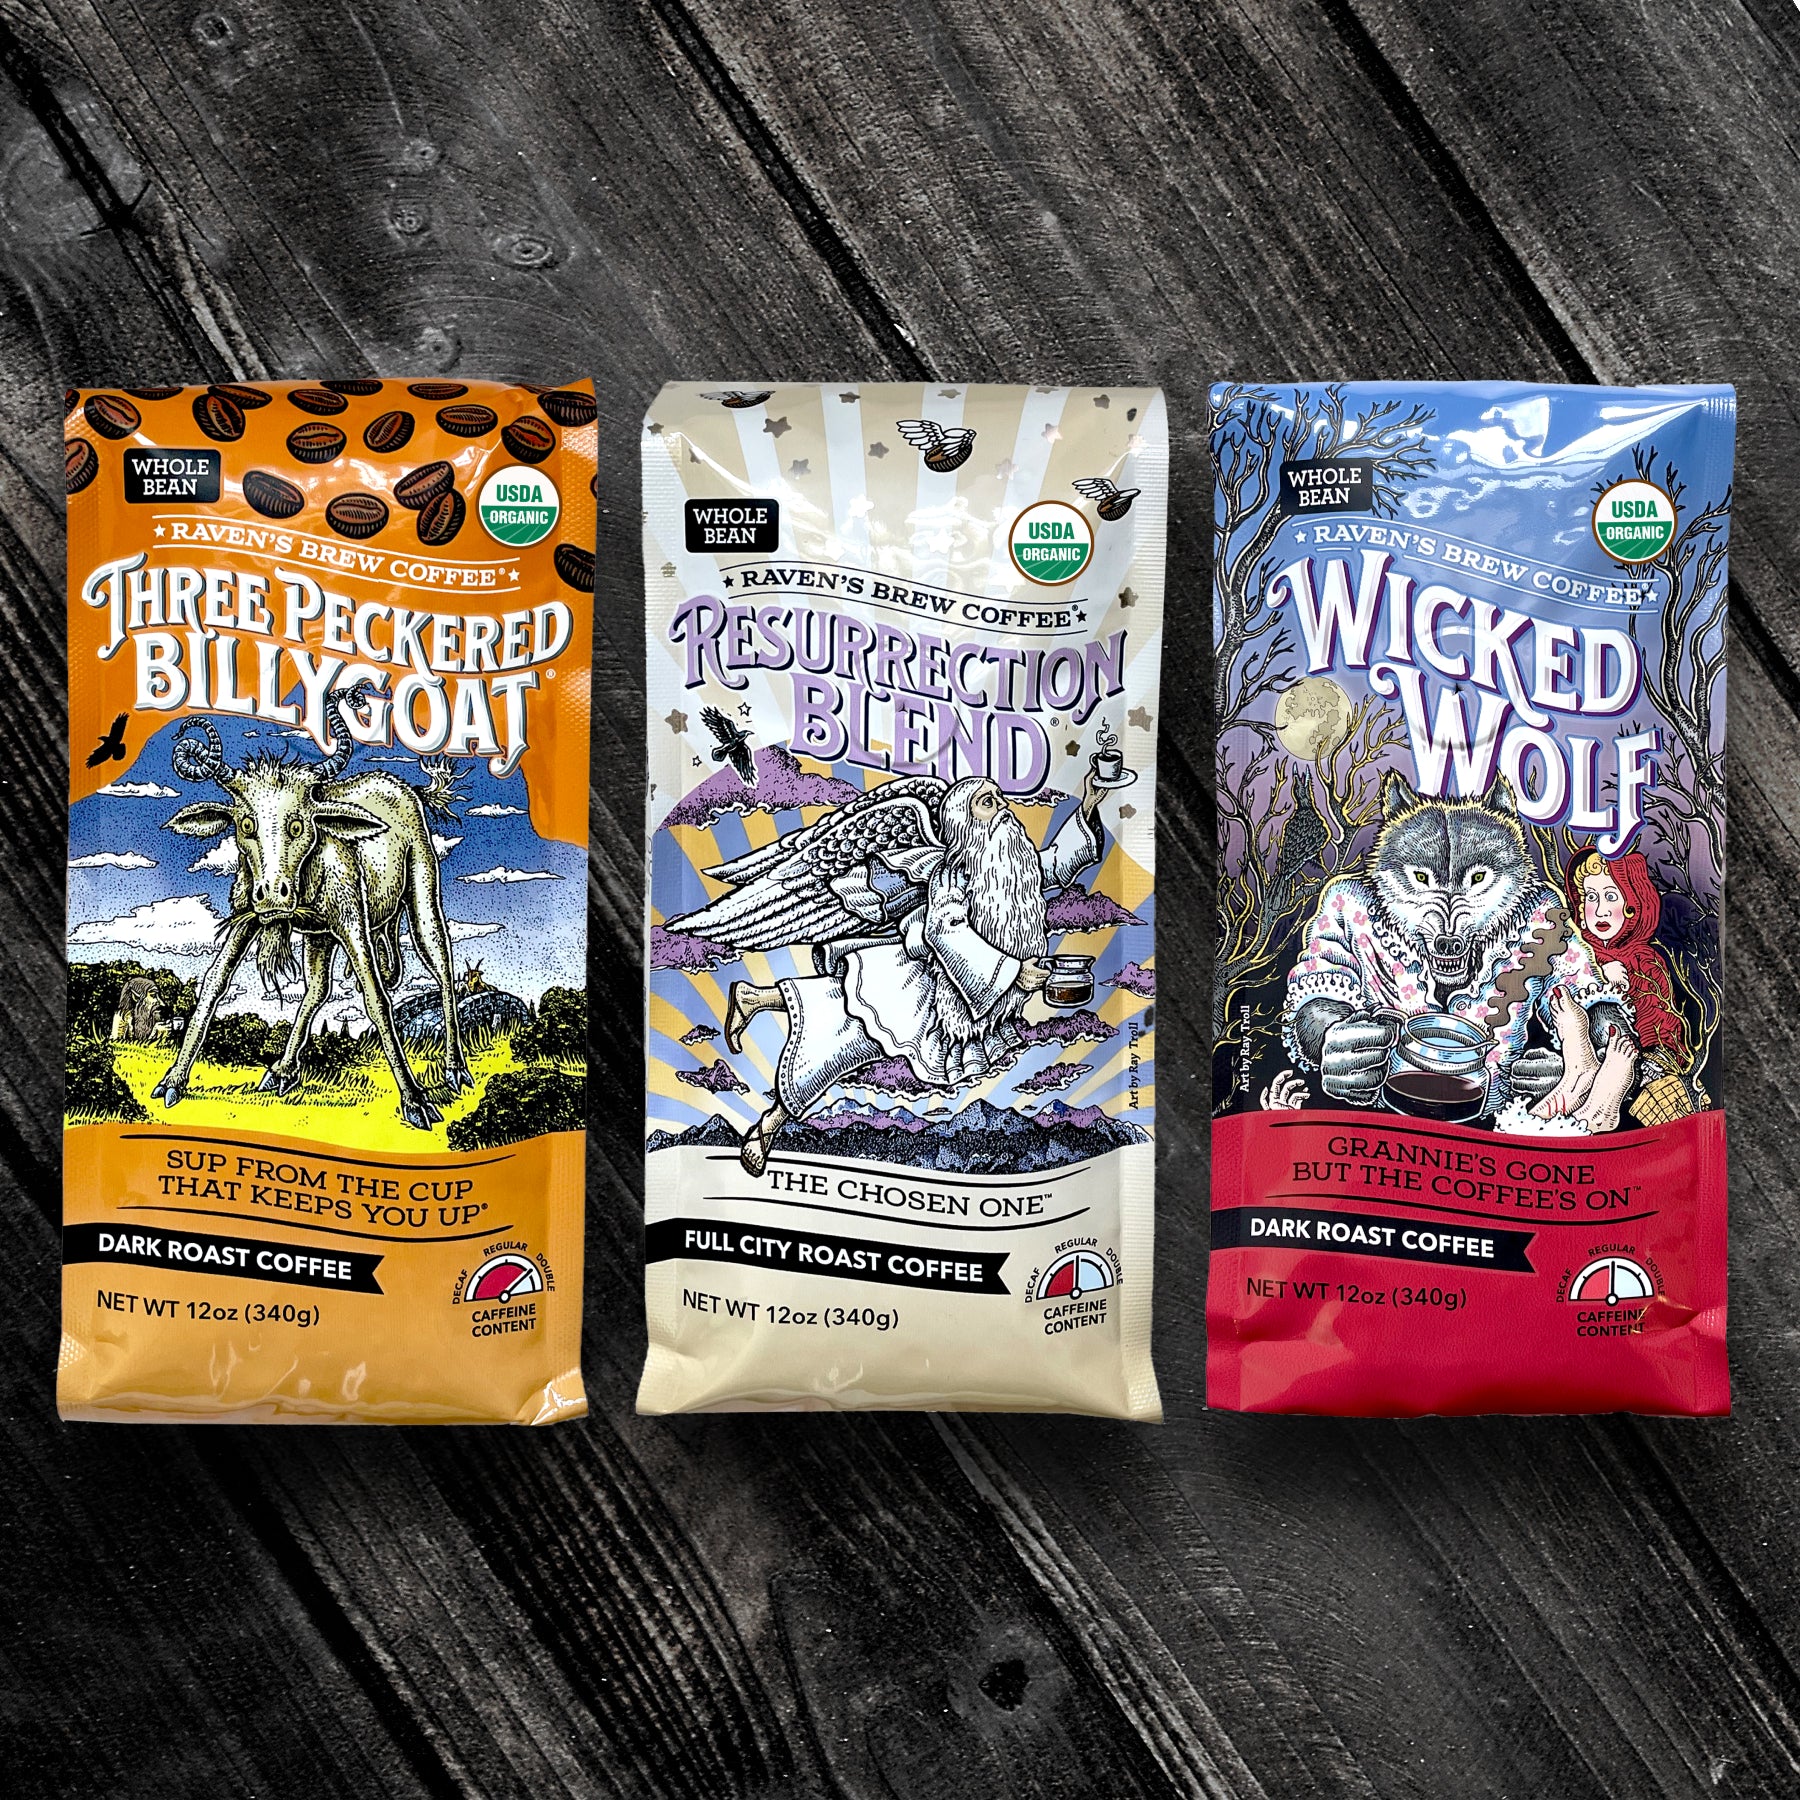 Three Peckered Billy Goat® Coffee, Resurrection® Blend Coffee and Wicked Wolf® Coffee Whole Bean Organic Cold Brew Pack